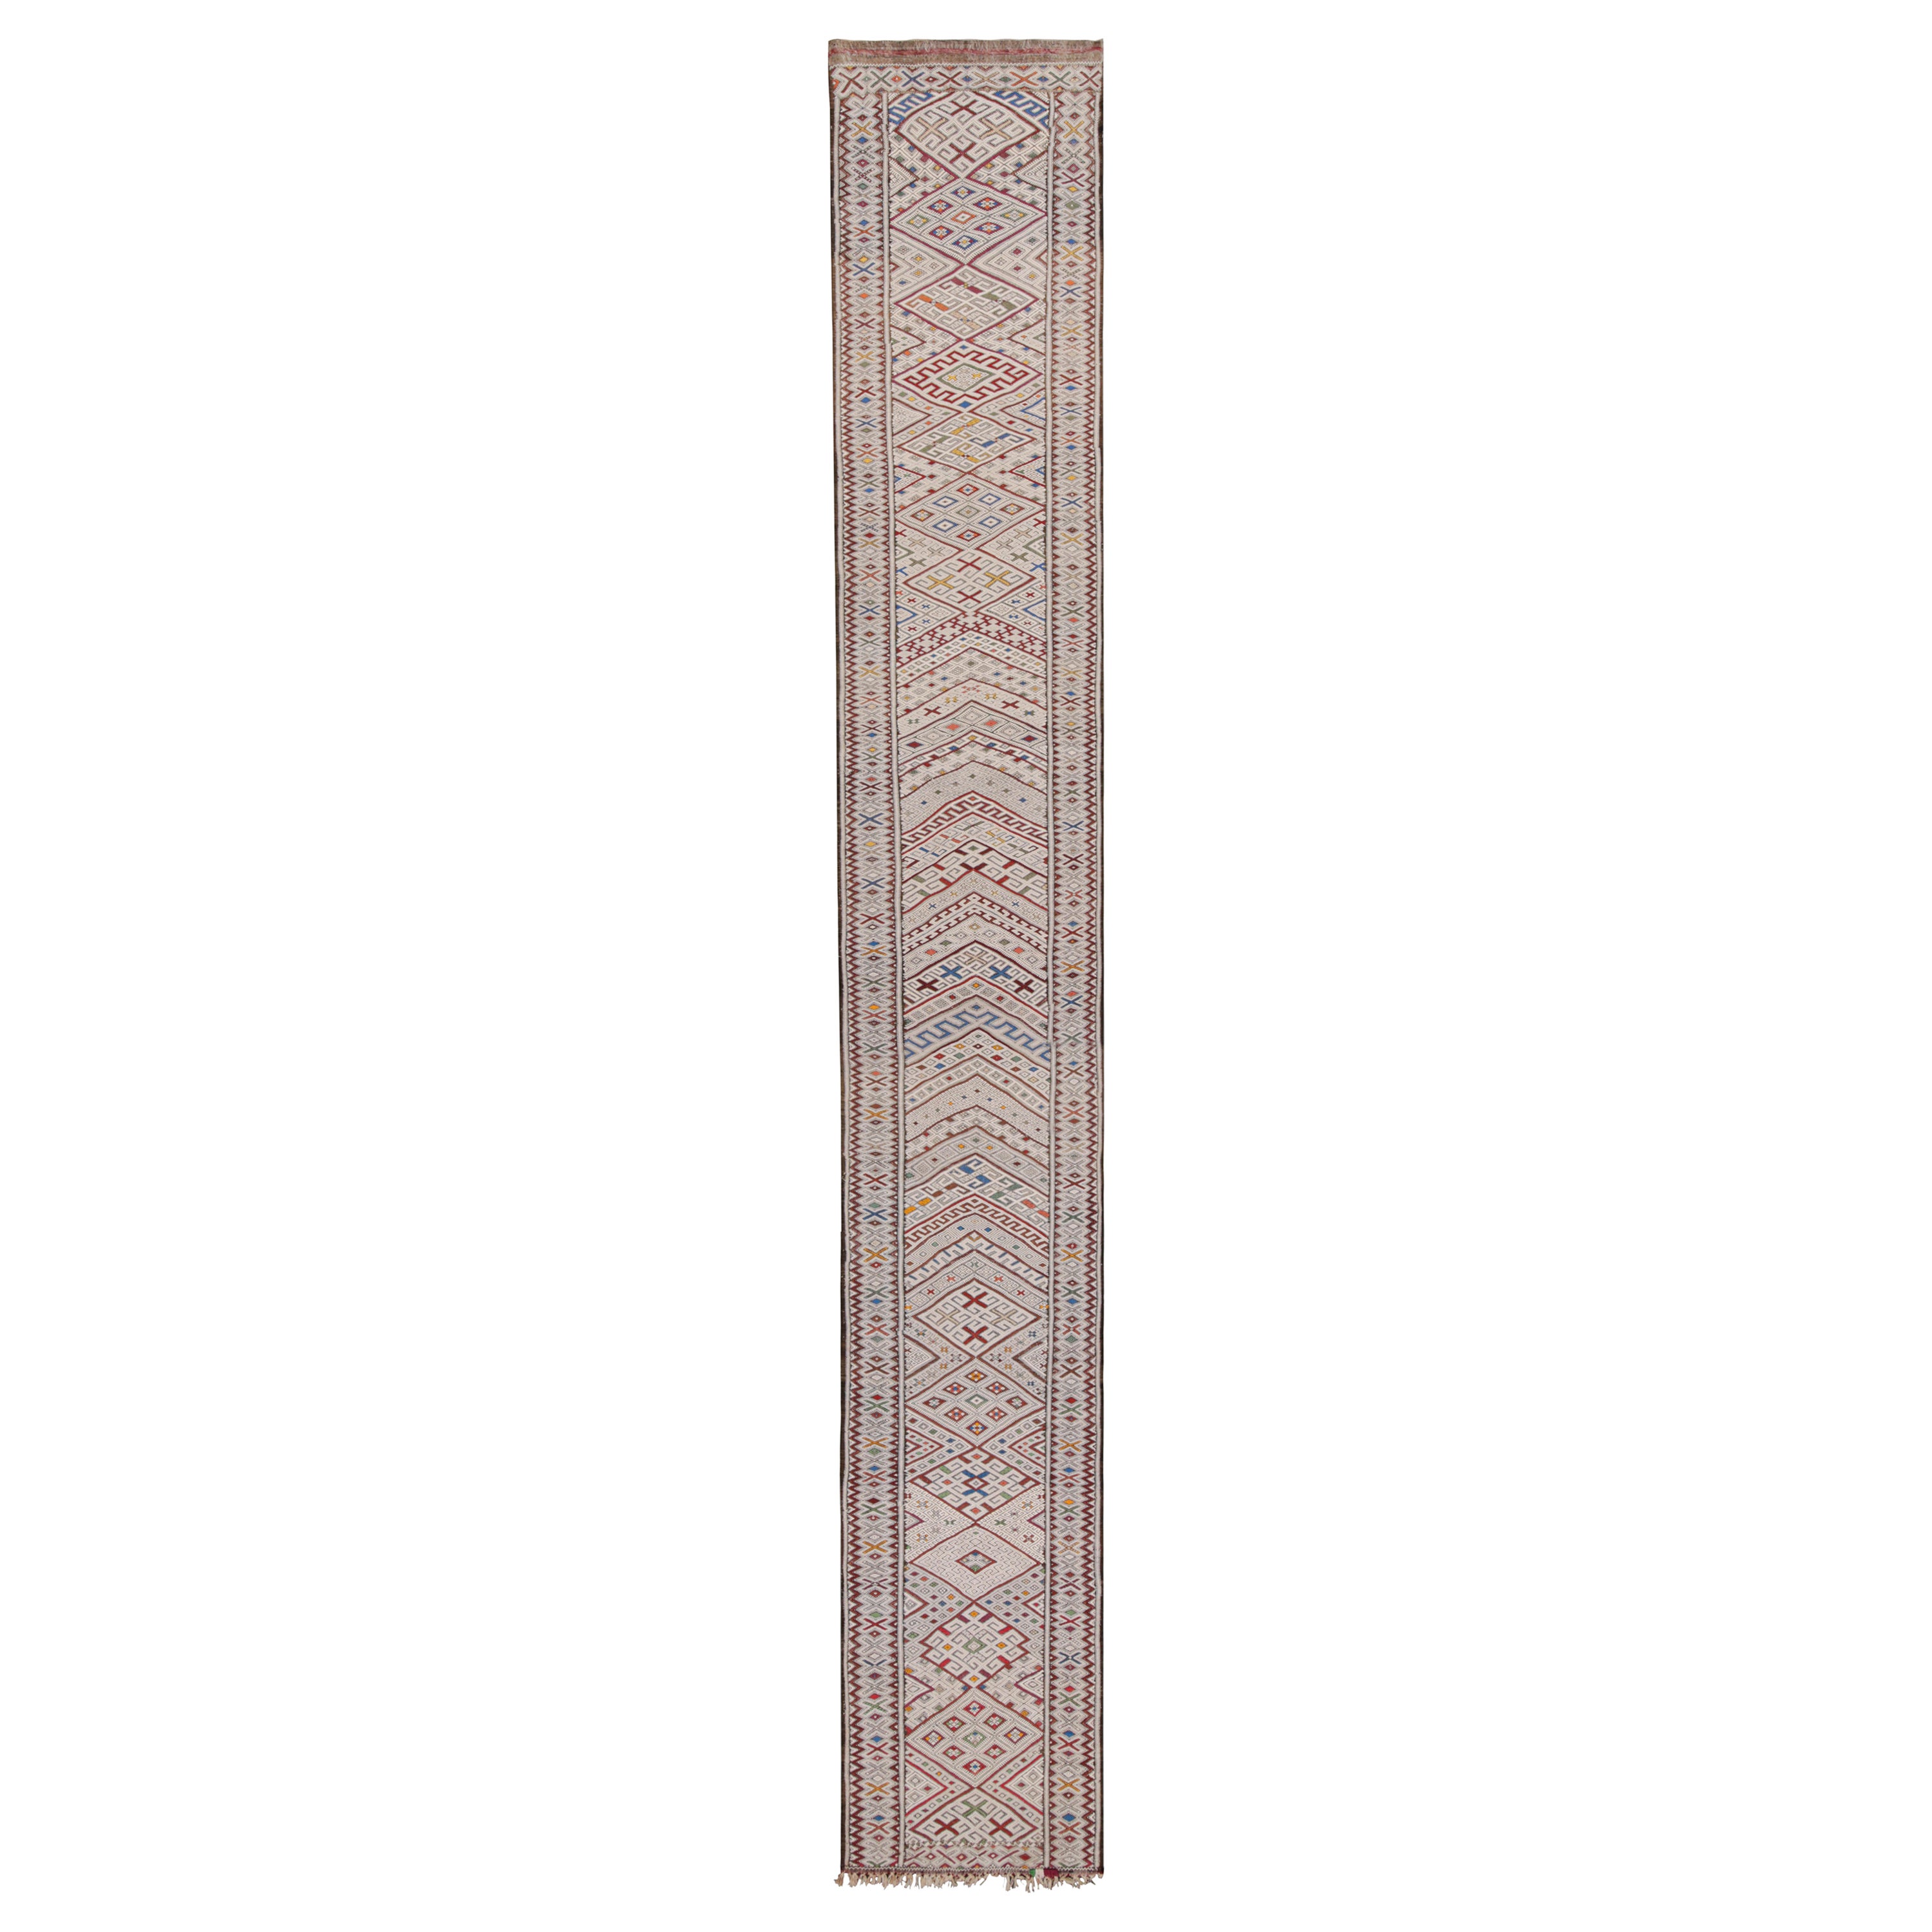 Vintage Moroccan Kilim Runner with Polychromatic Patterns by Rug & Kilim For Sale